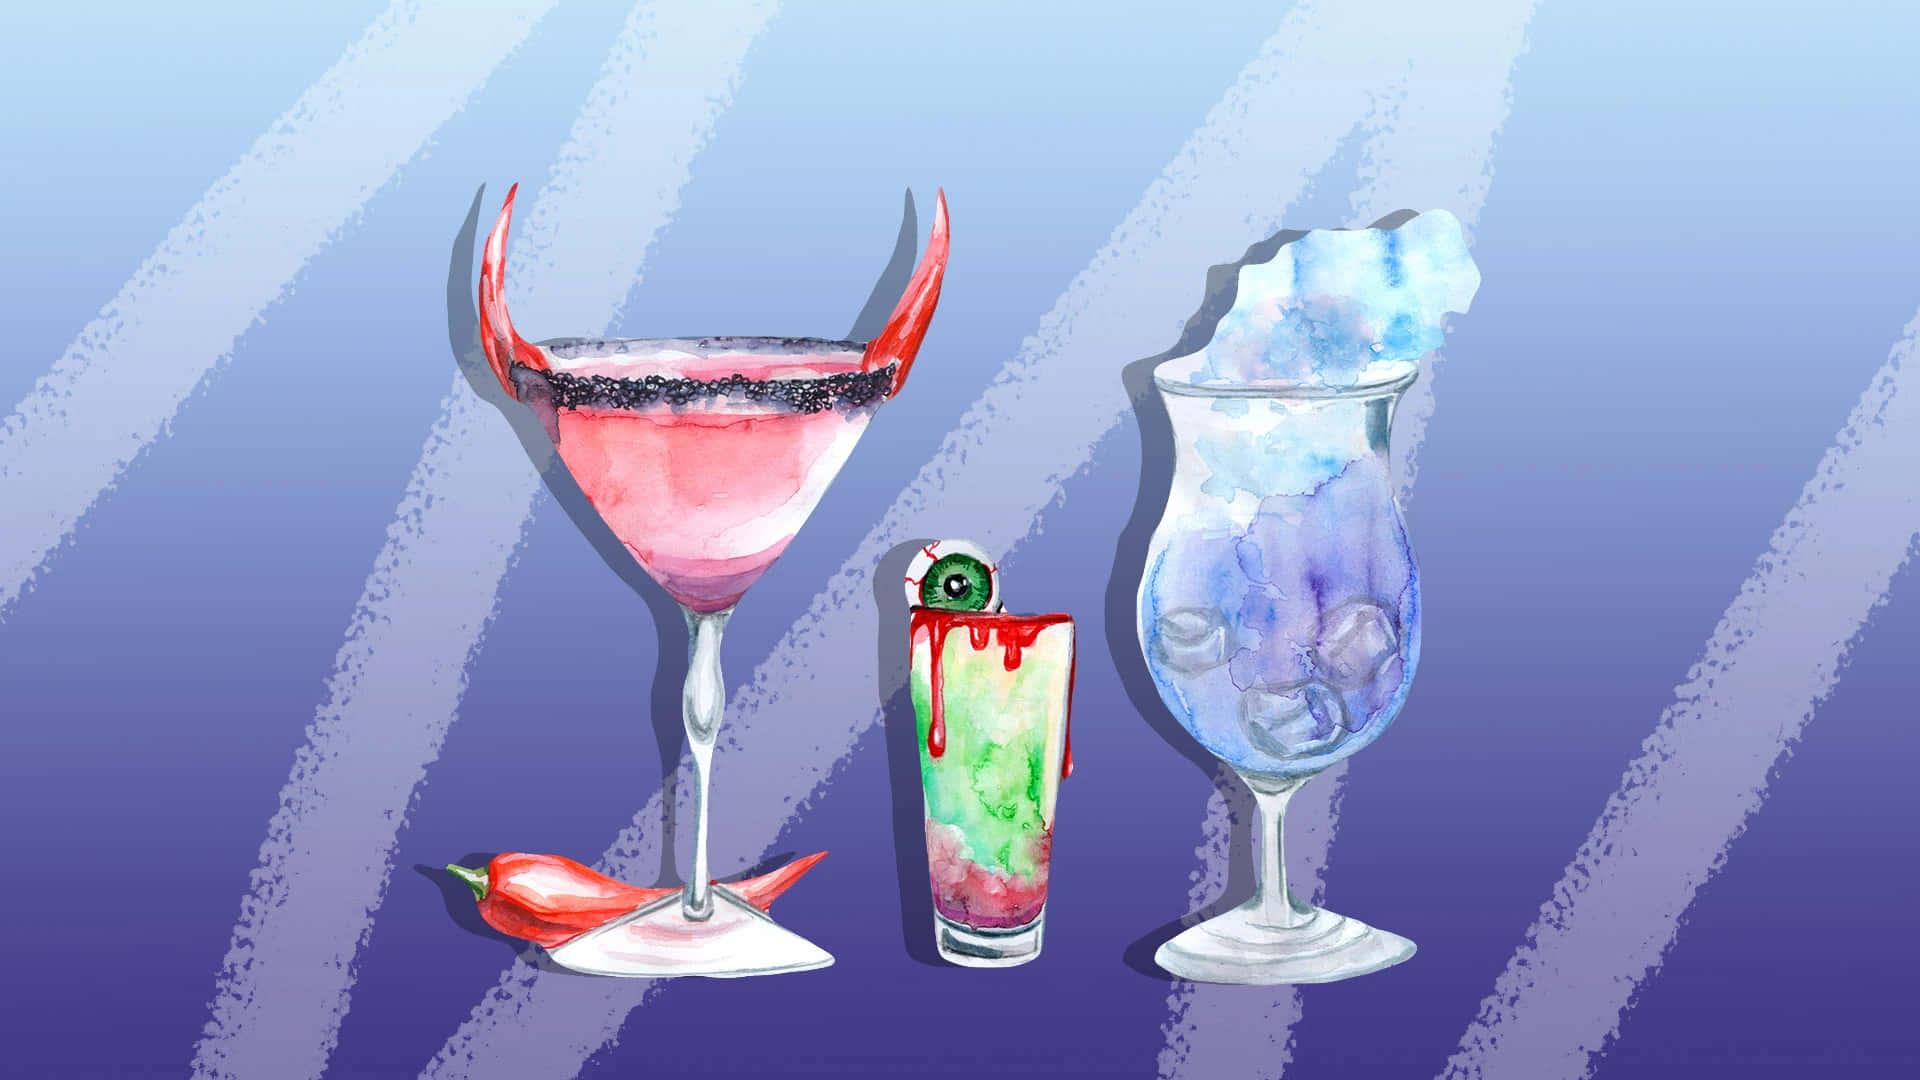 Celebrate Halloween with a "Spooky Cocktail"! Wallpaper